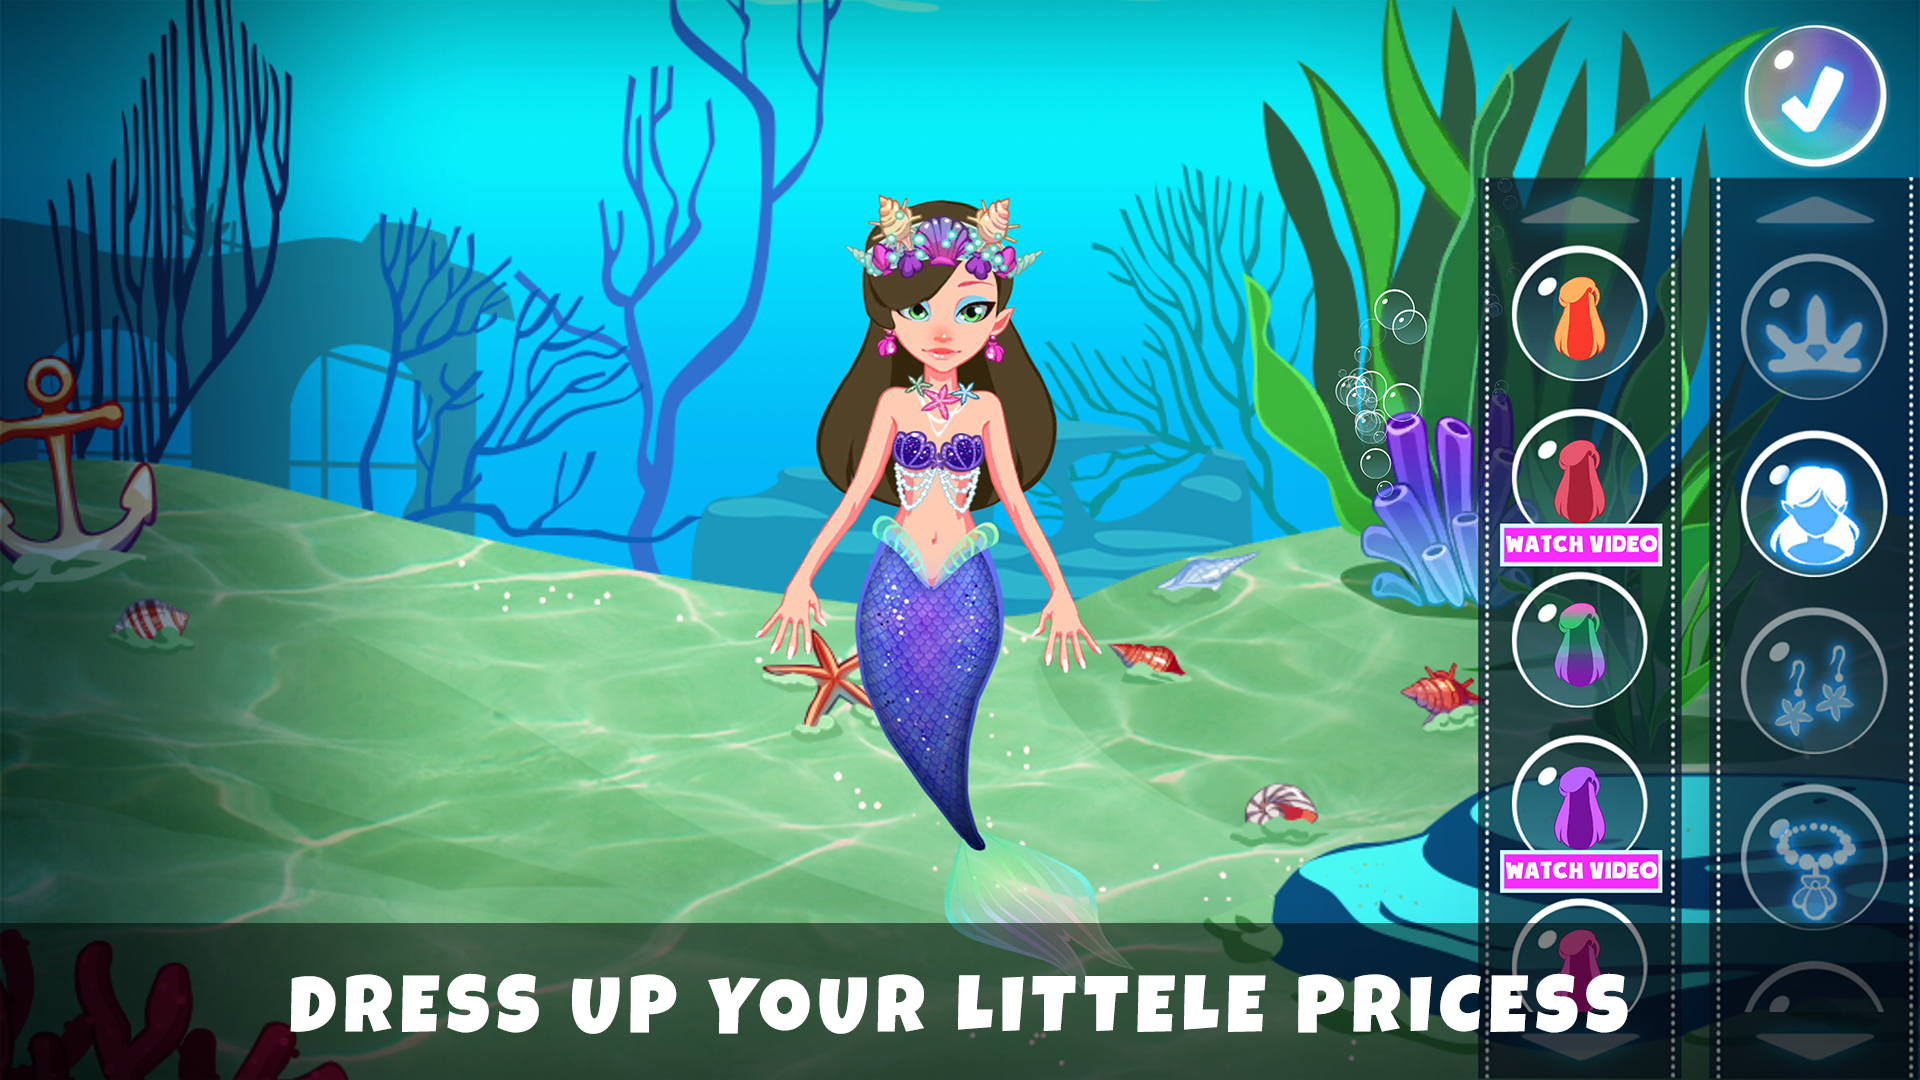 Mermaid Dress Up Games Free APK for Android Download